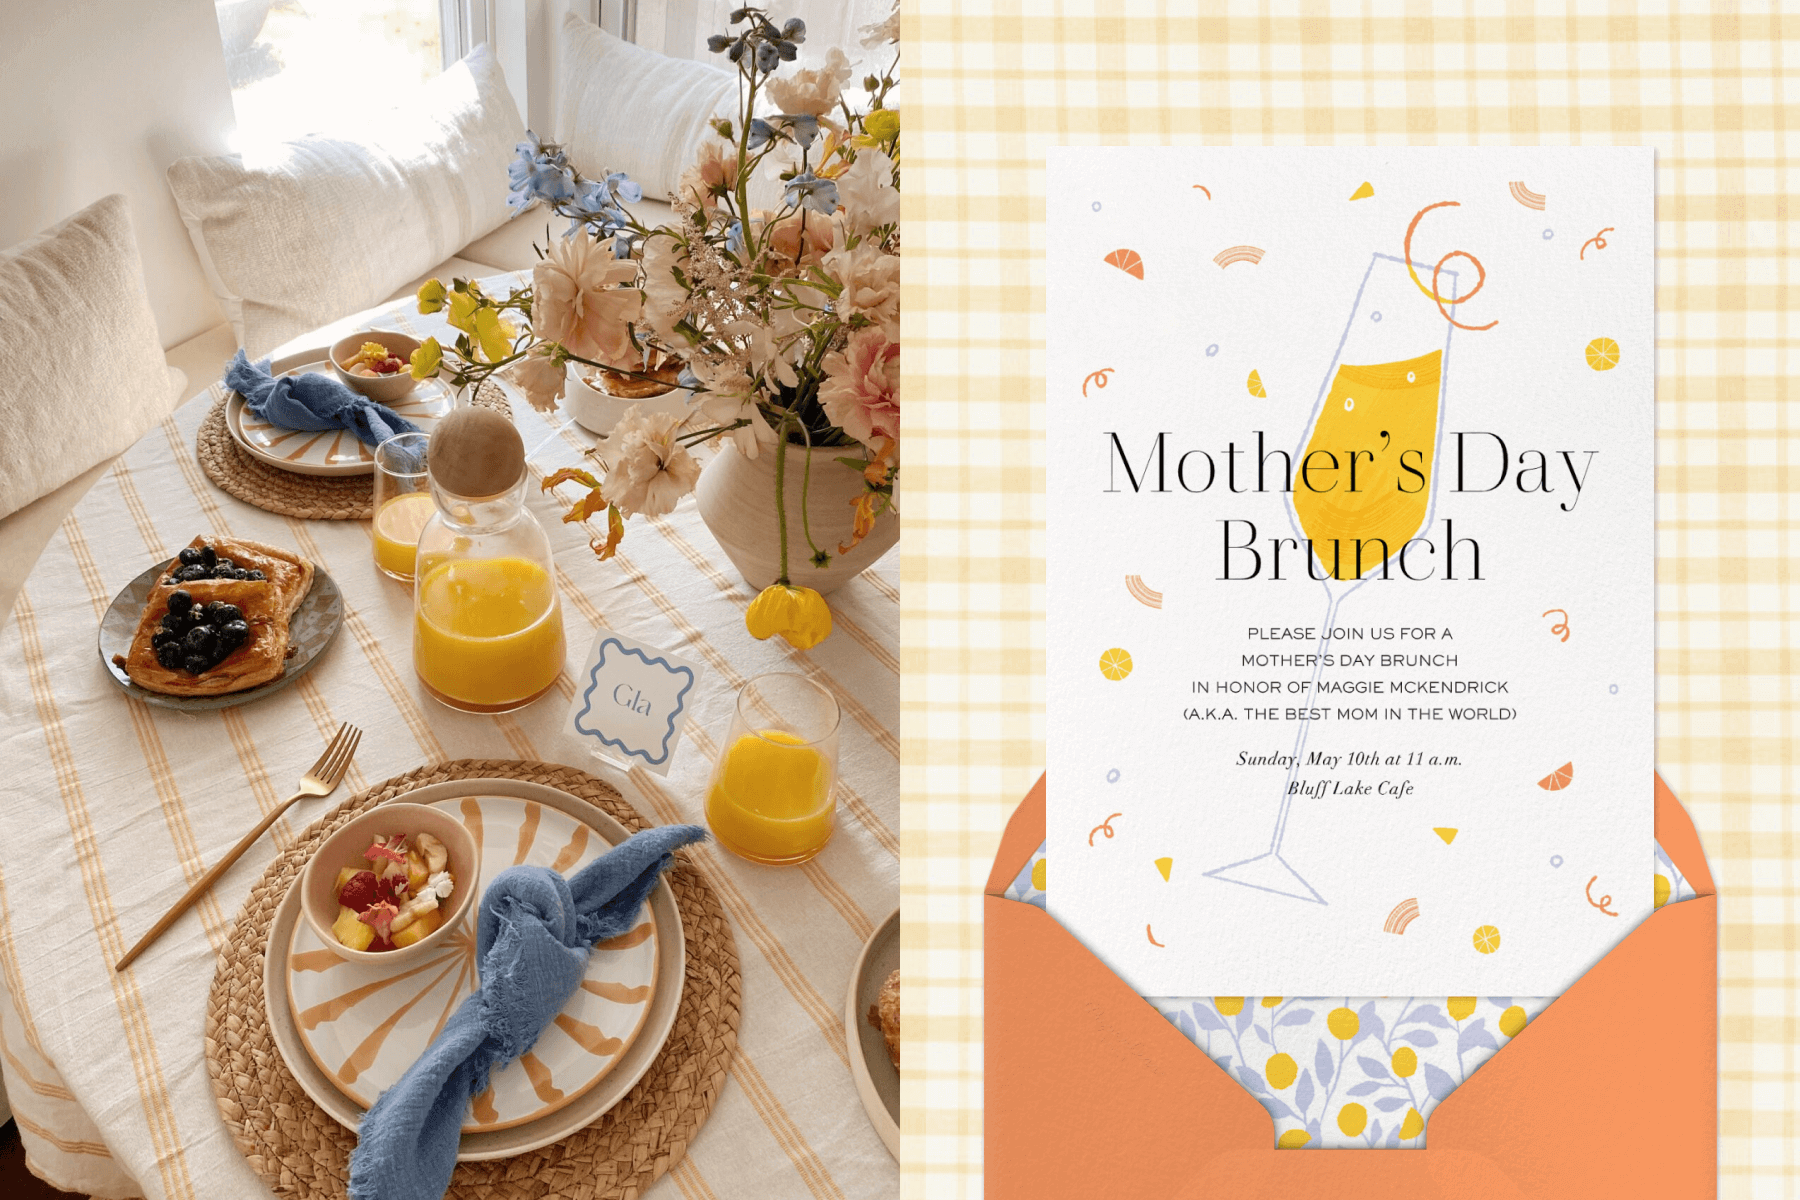 Breakfast food, orange juice, and flowers laid out on a striped table cloth; an invitation for ‘Mother’s Day Brunch’ with a mimosa and little orange twist-inspired confetti.